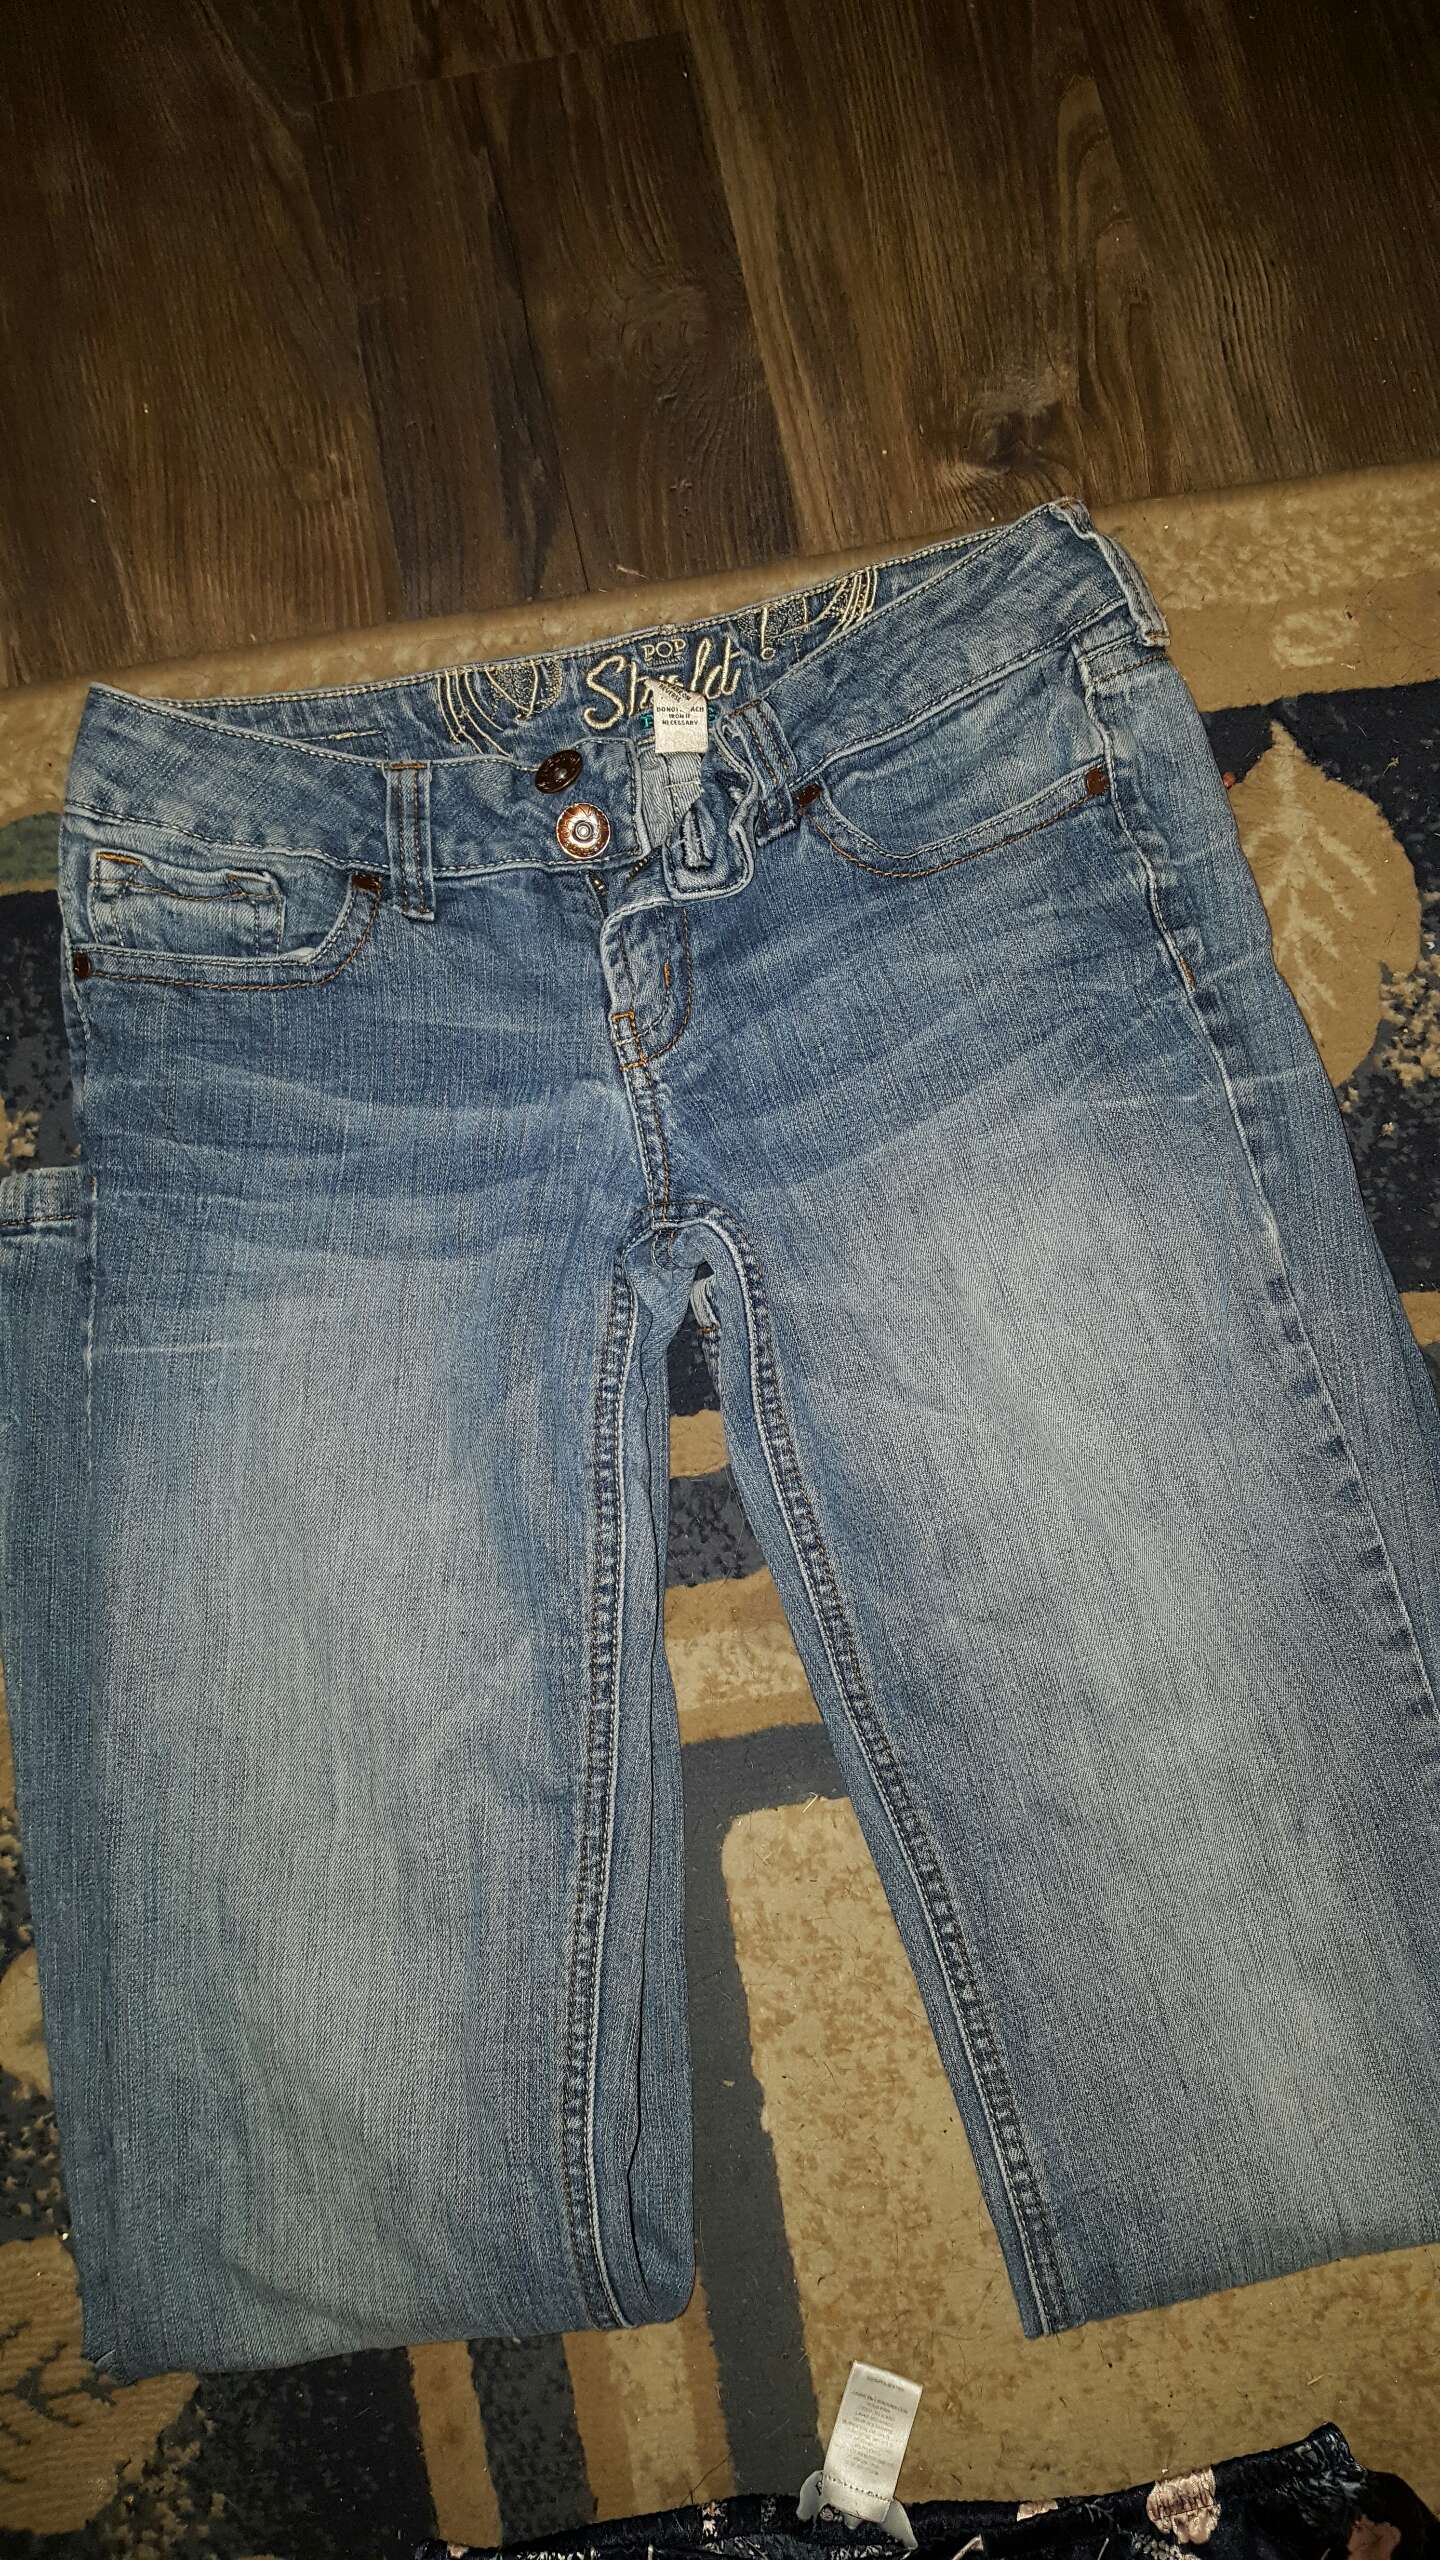 Refuge jeans for sale in San Antonio, TX - 5miles: Buy and Sell